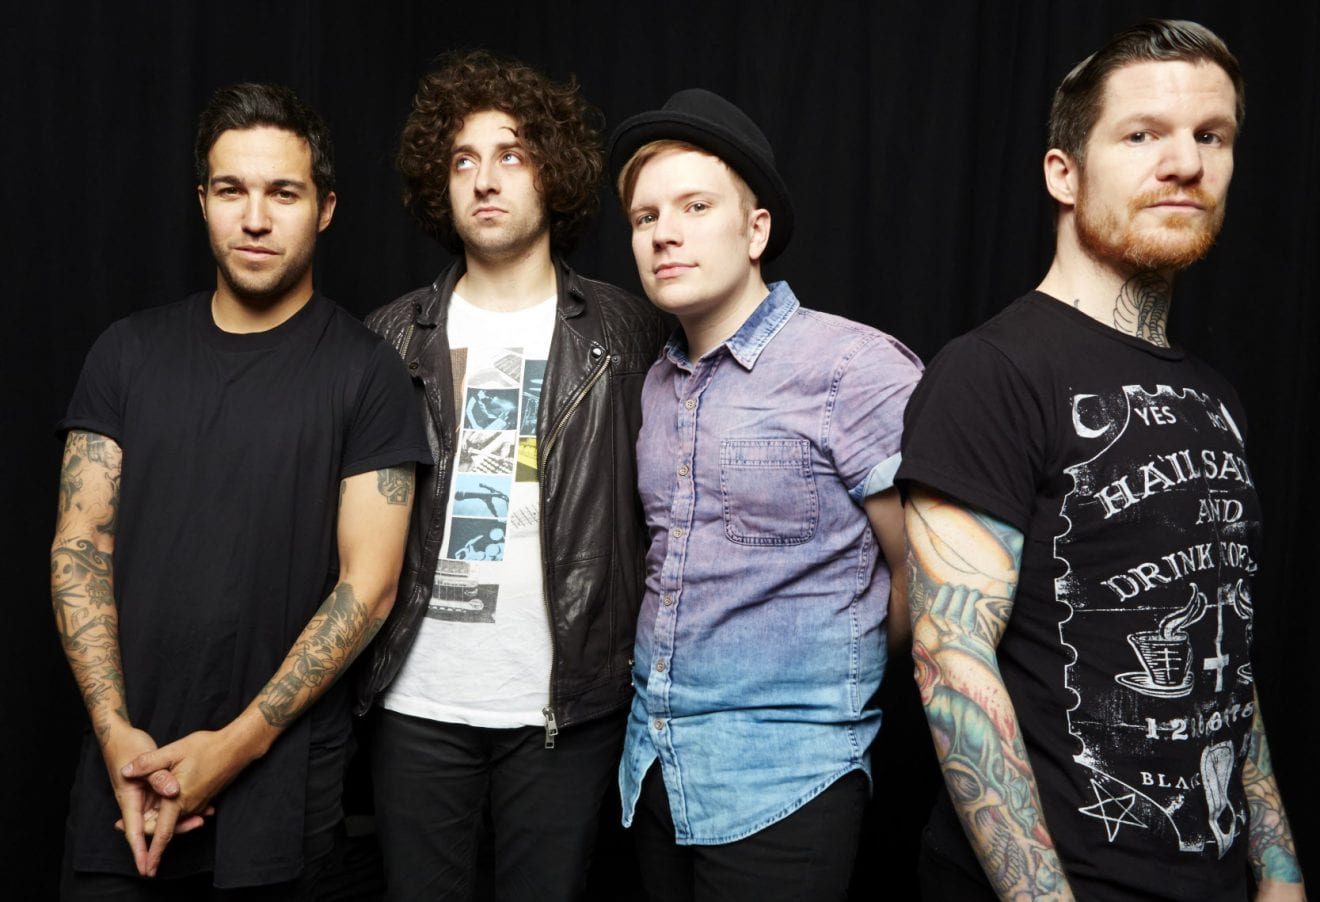 Centuries Fall Out Boy